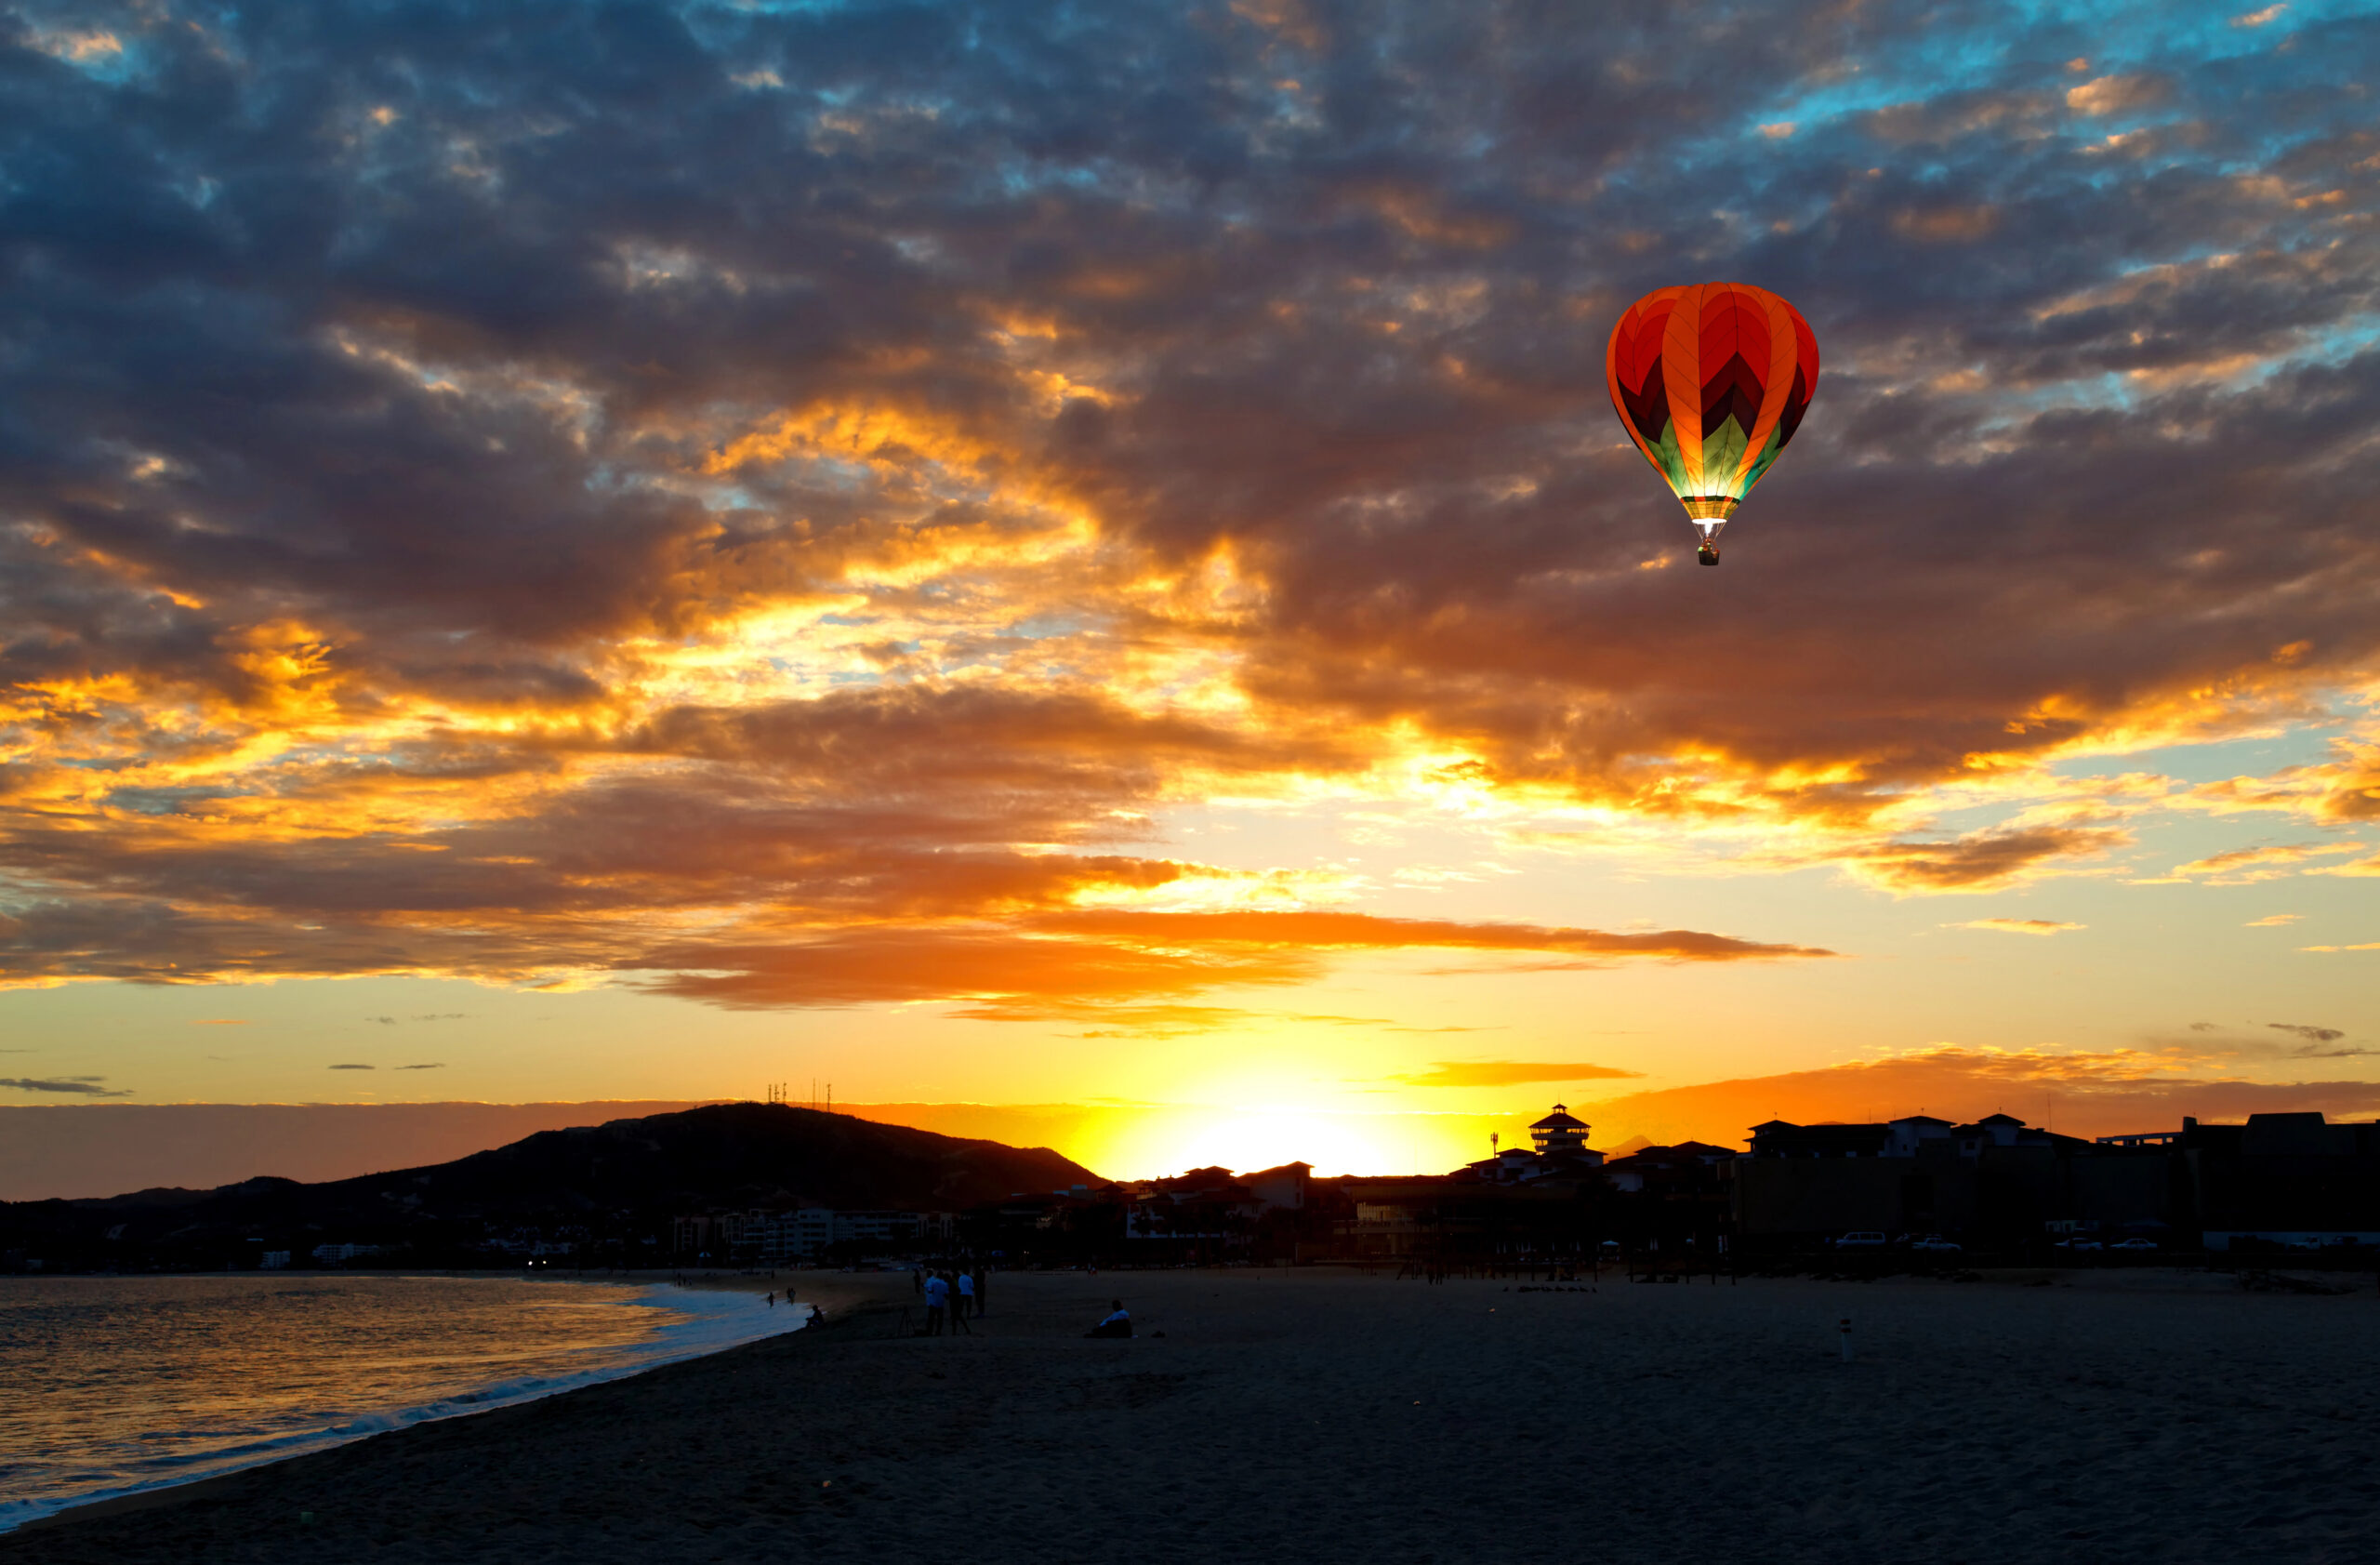 Hot air balloon at sunset over the beach.